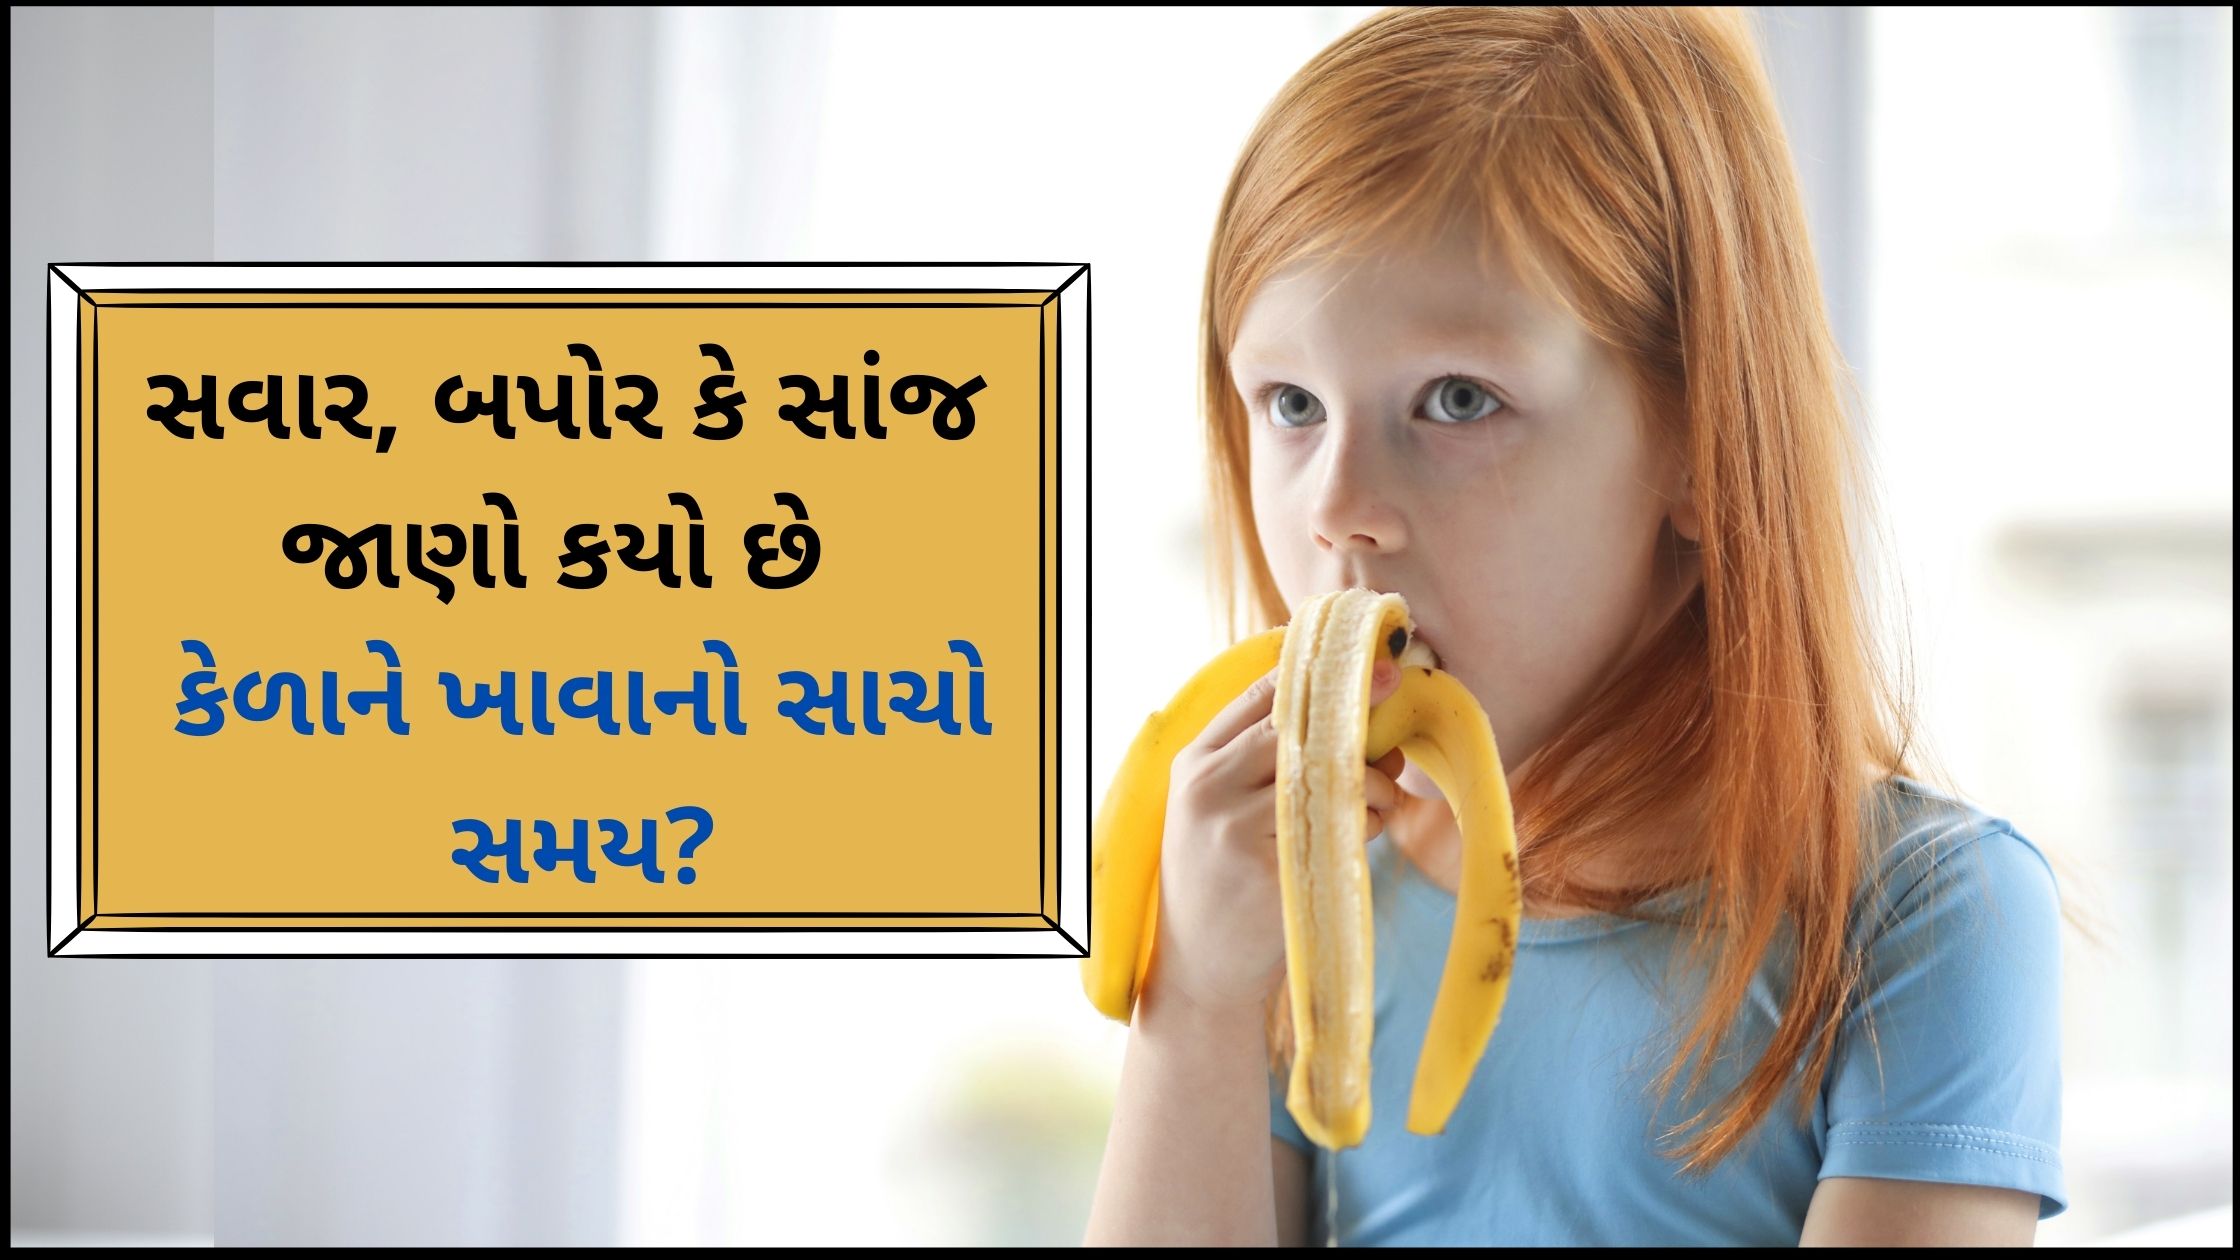 Know the right time to eat banana in the morning, afternoon or evening?